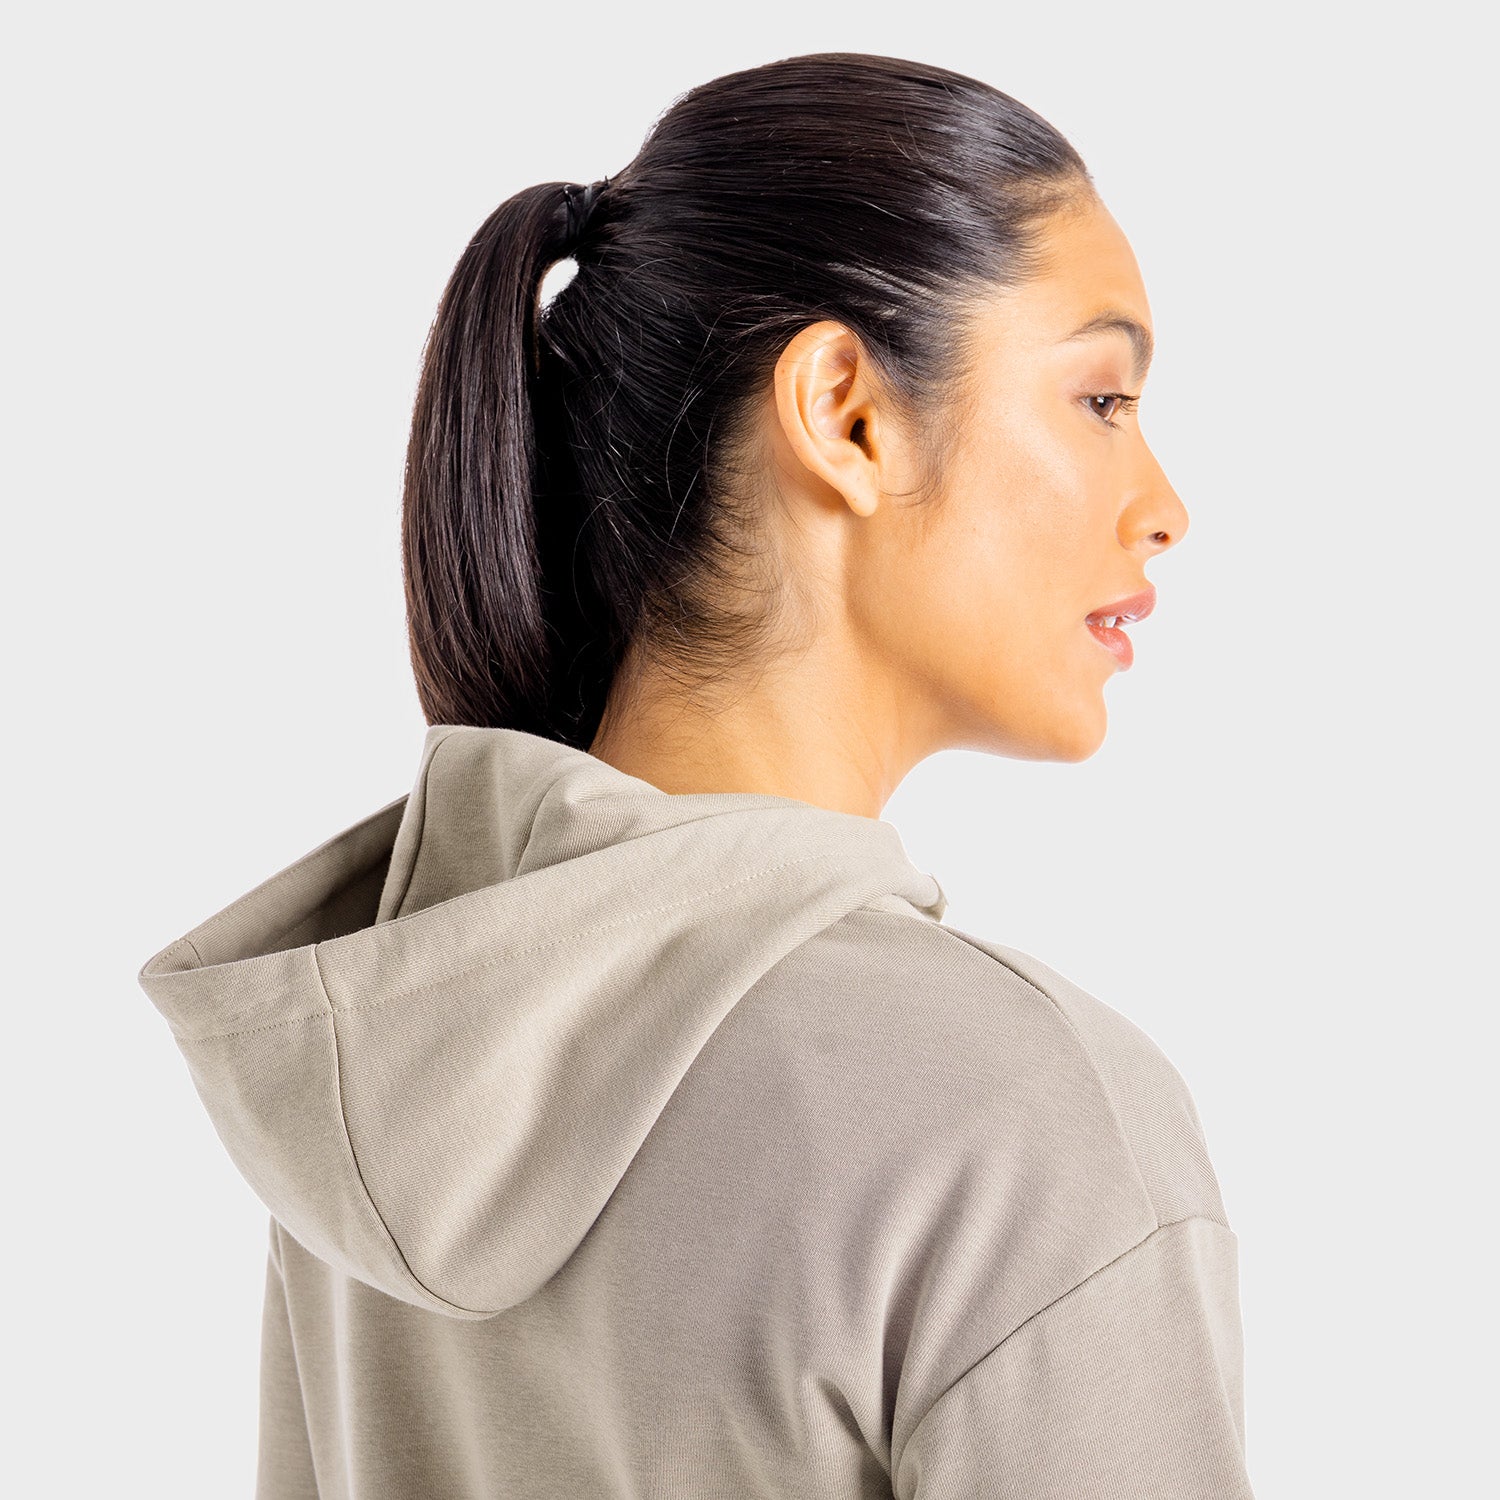 squatwolf-gym-hoodies-women-core-zip-up-taupe-workout-clothes